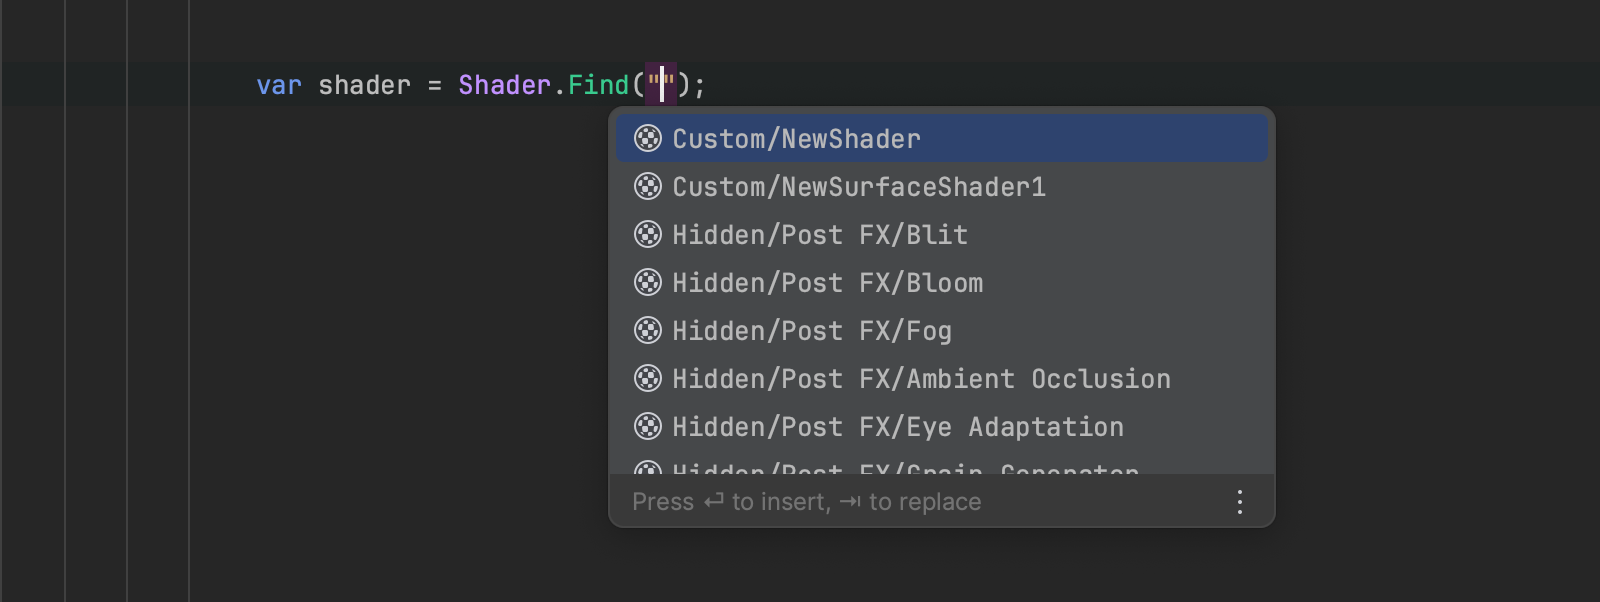 Completion of shader name in a call to Shader.Find